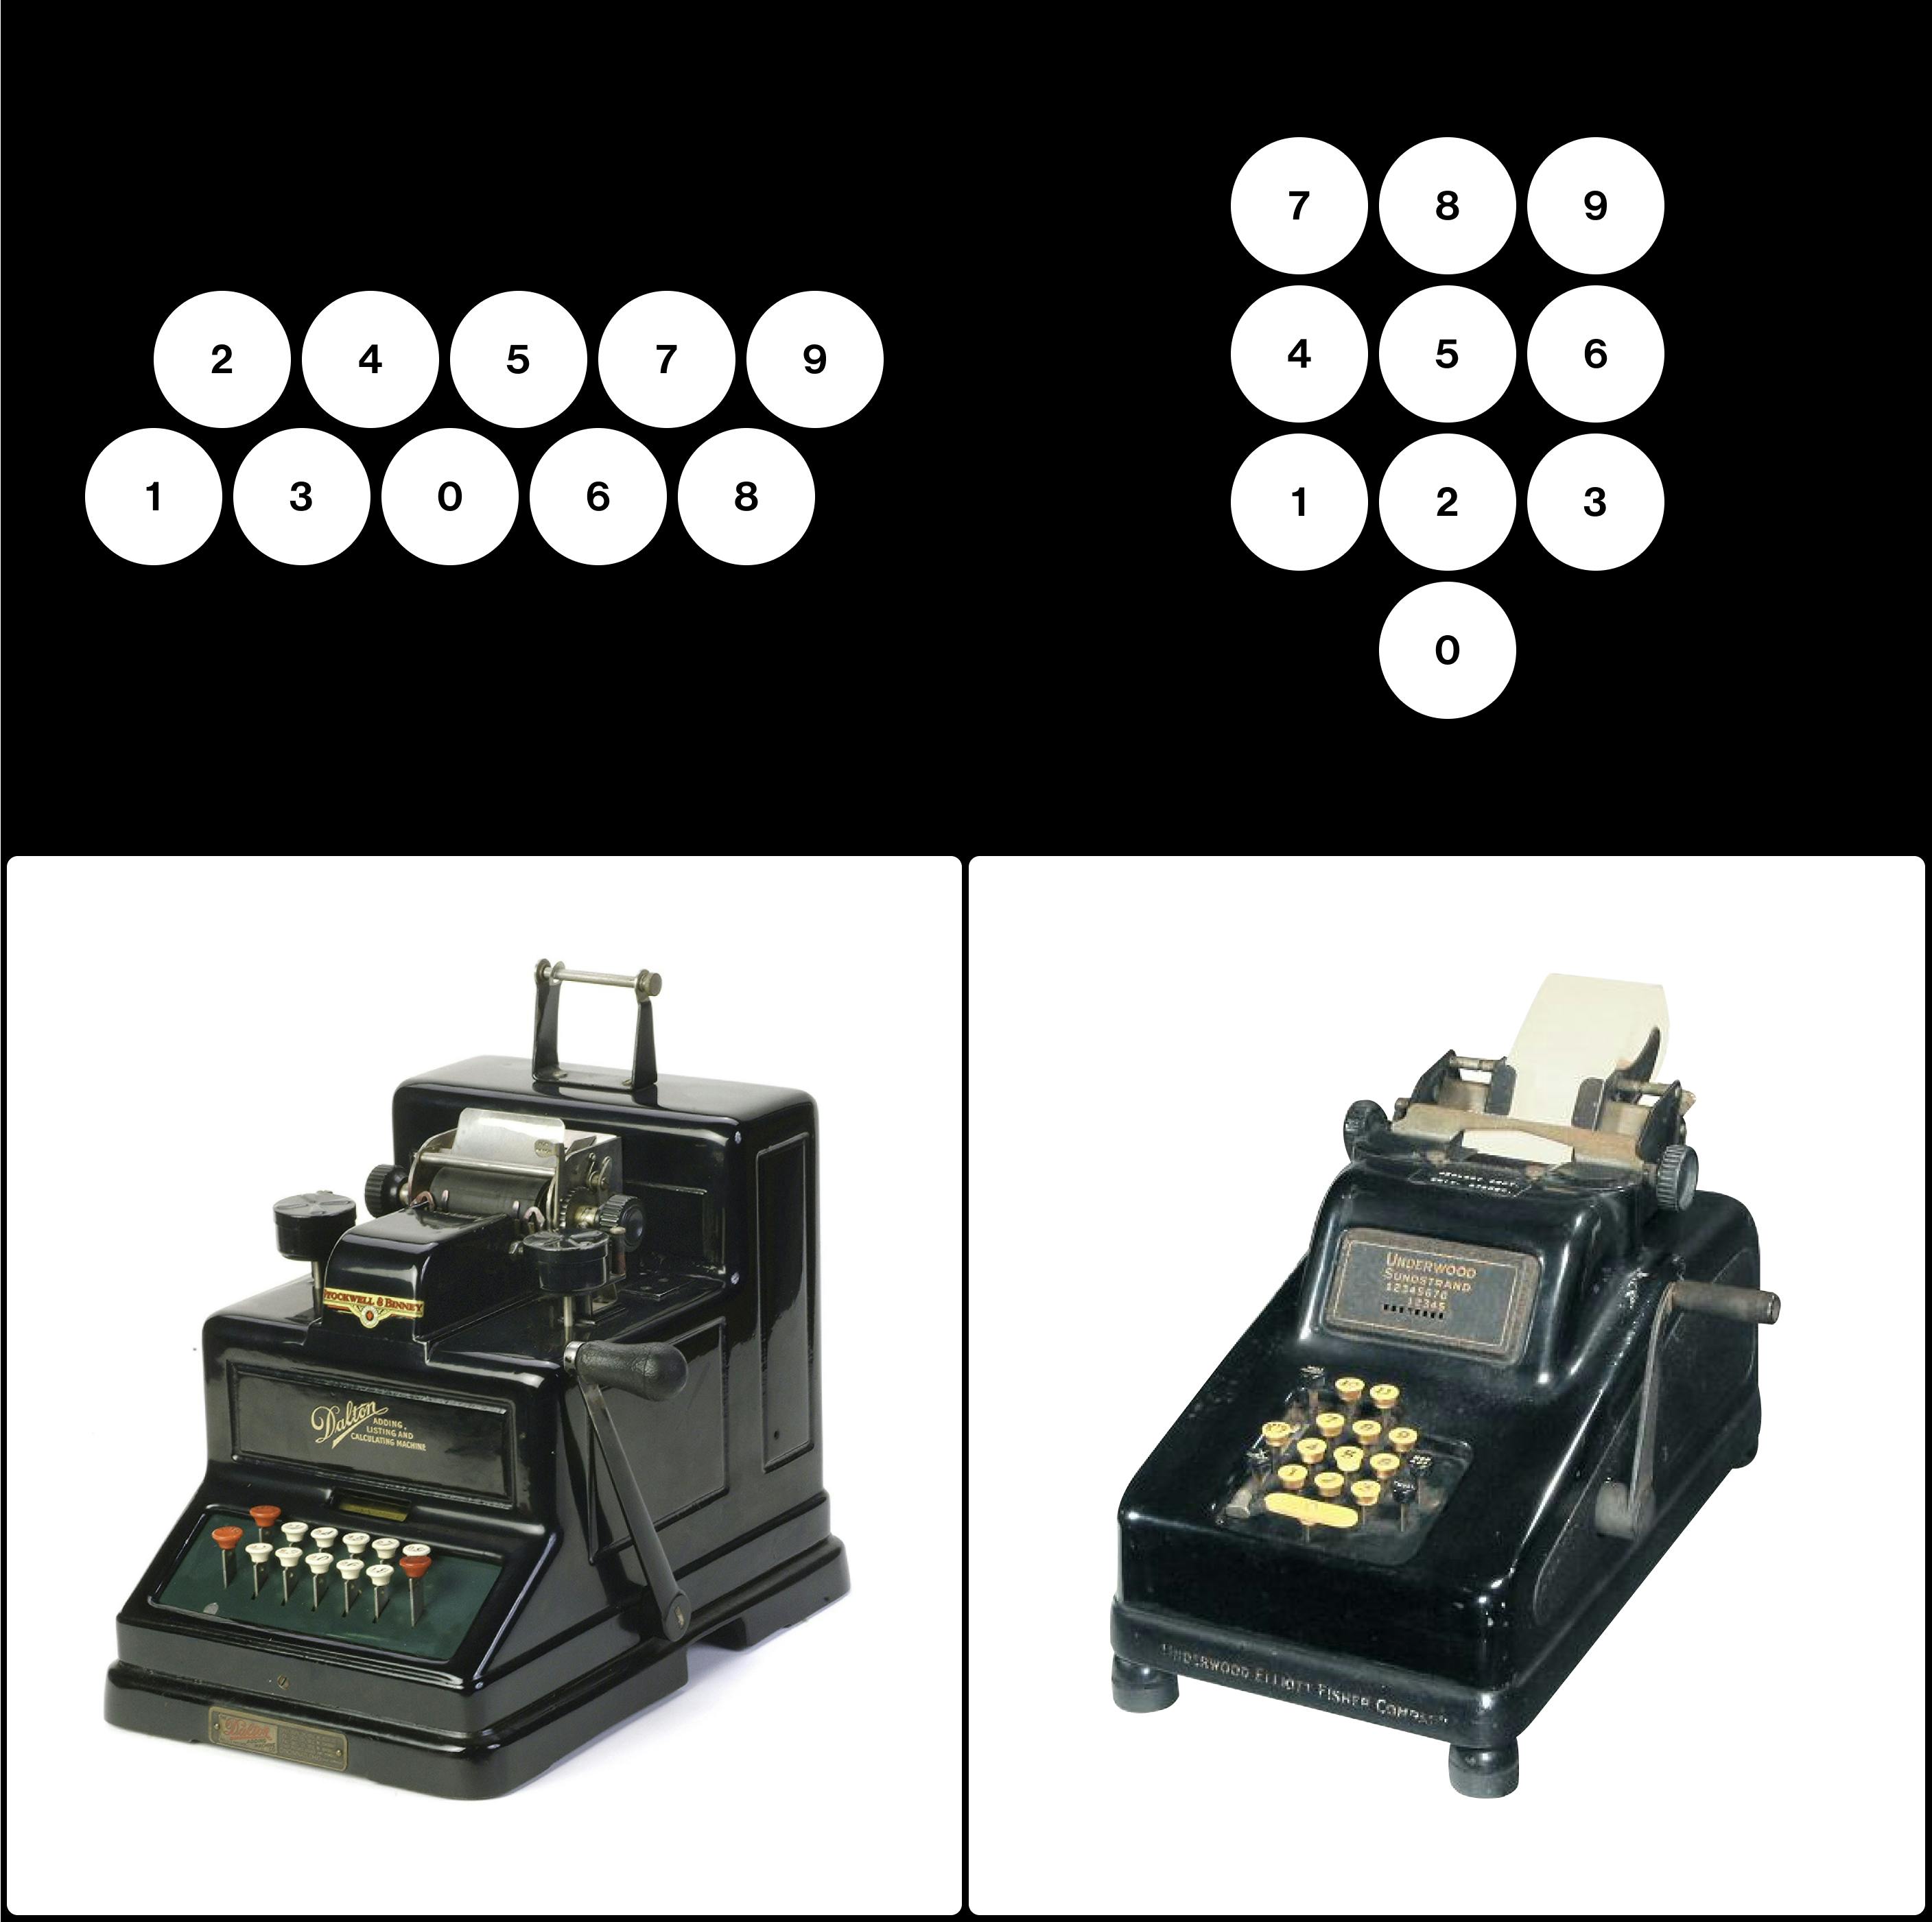 machine photos and keypad diagram side by side